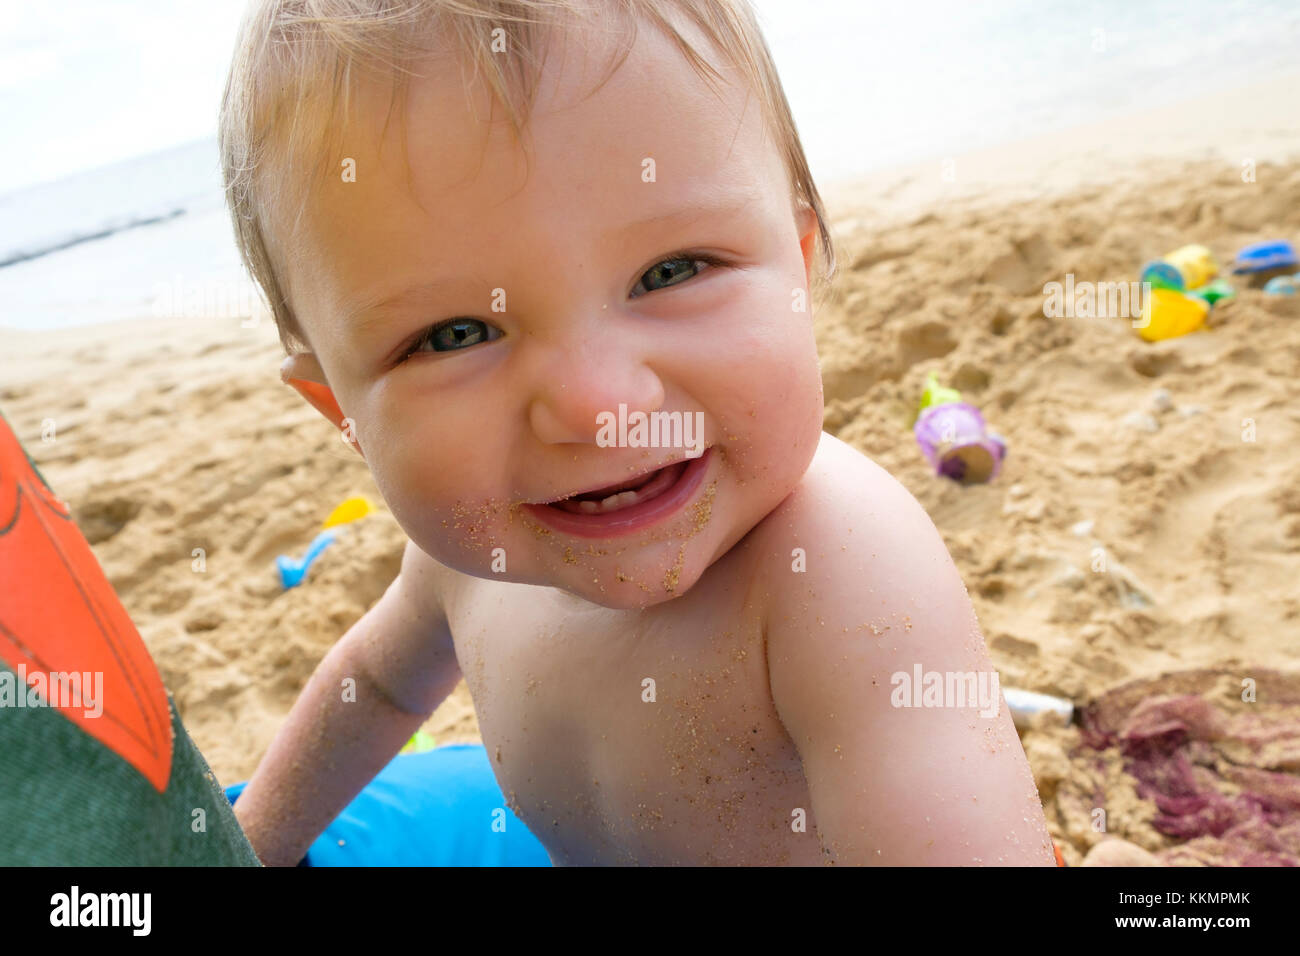 One Year Old On Beach Stock Photo